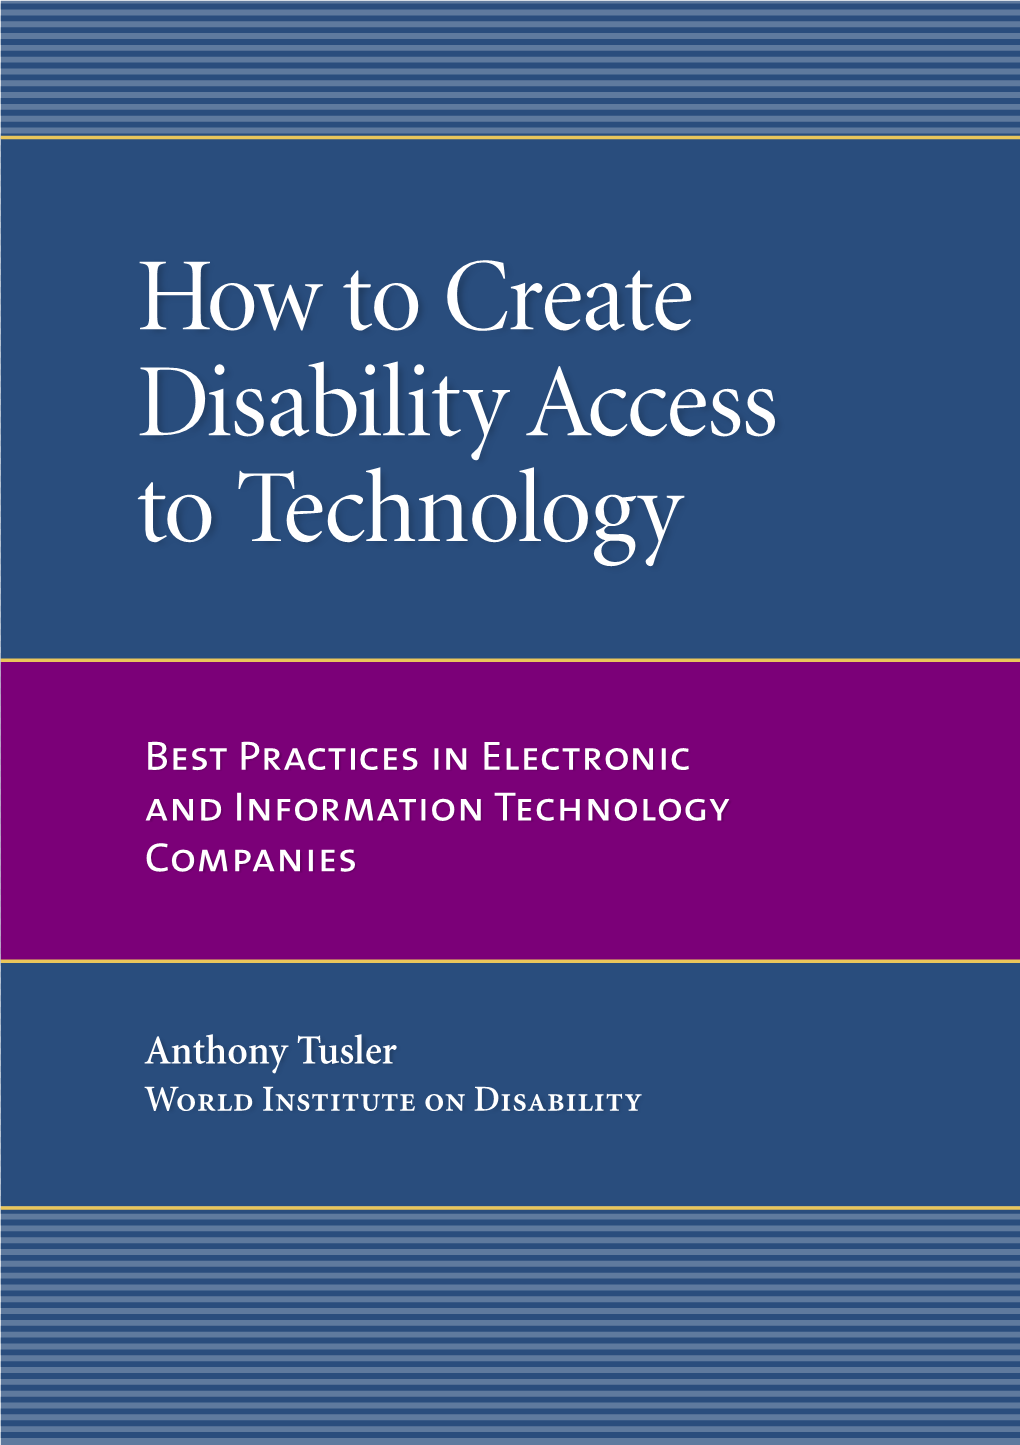 How to Create Disability Access to Technology